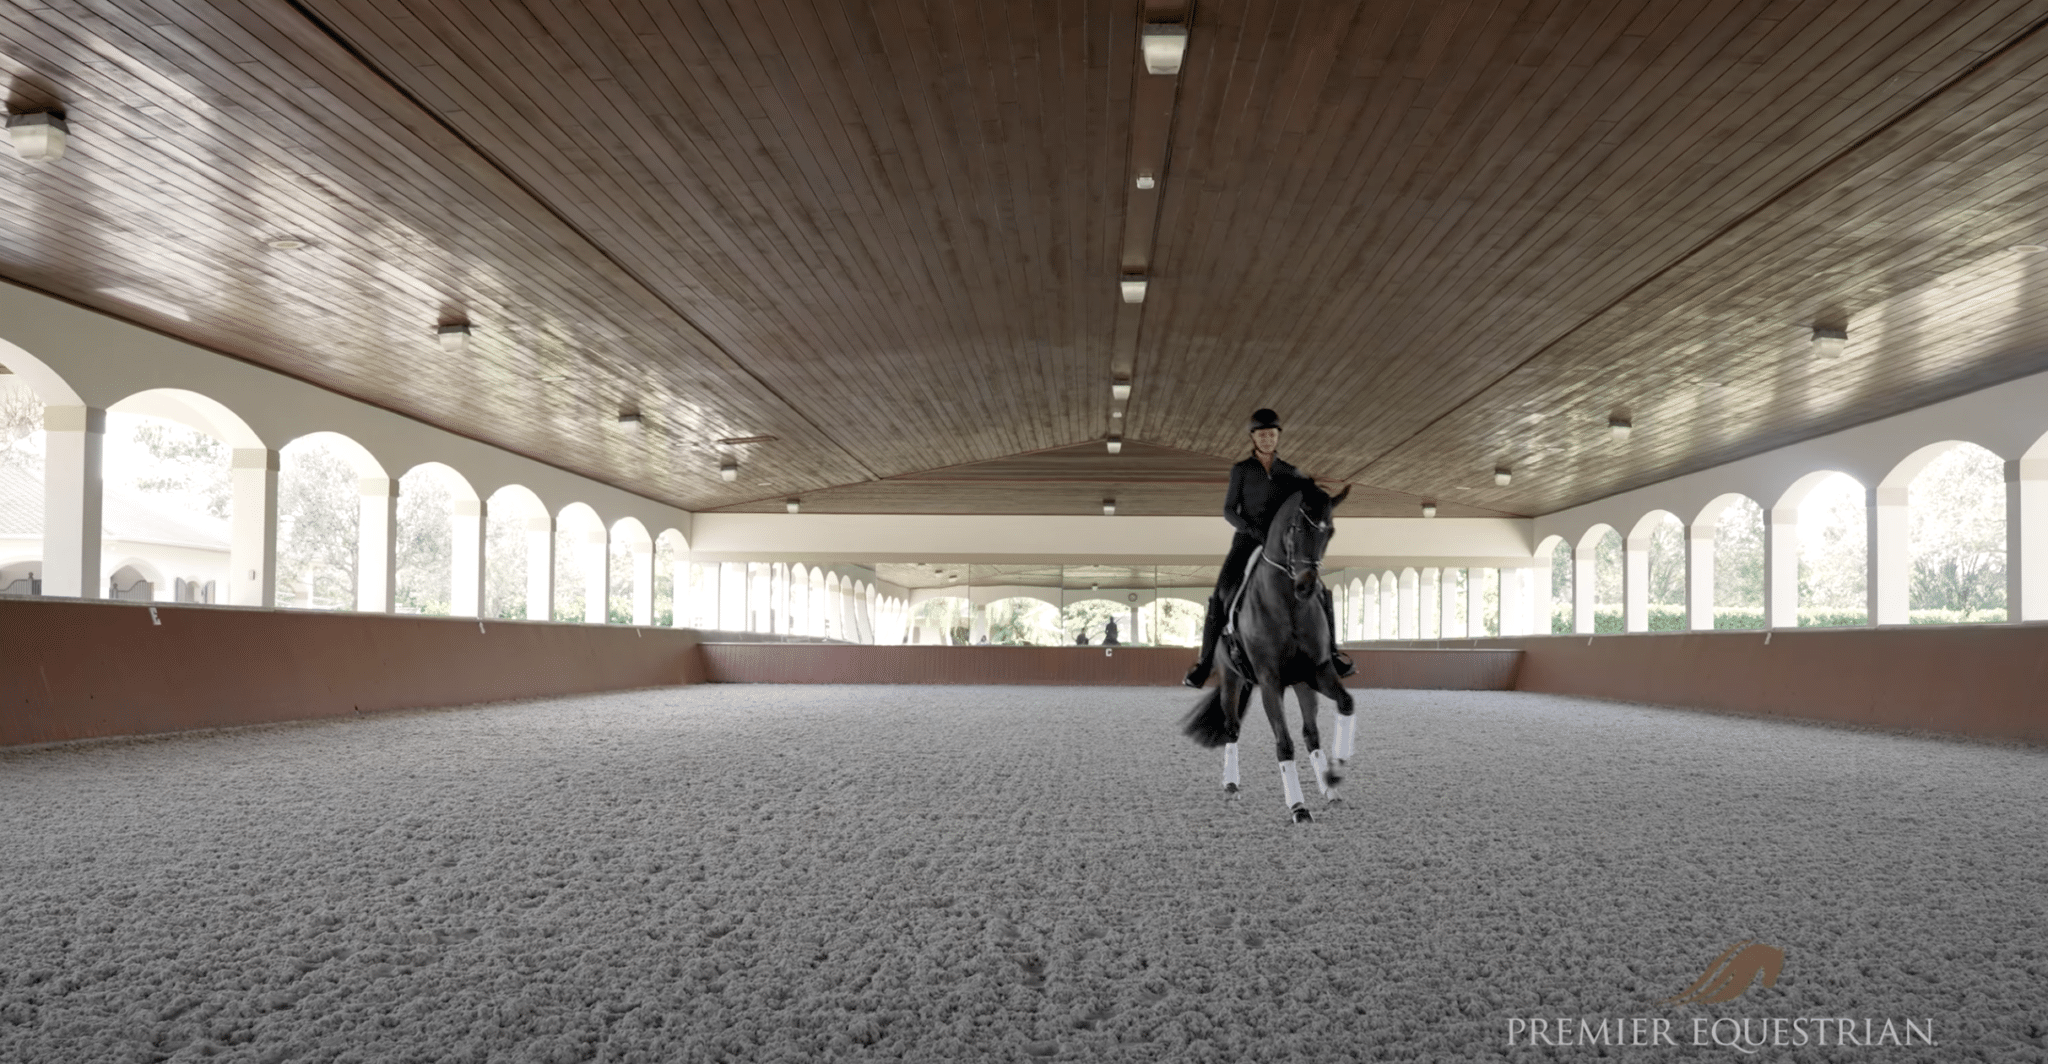 Horse rider on an arena that has Premier ProTex Footing Product